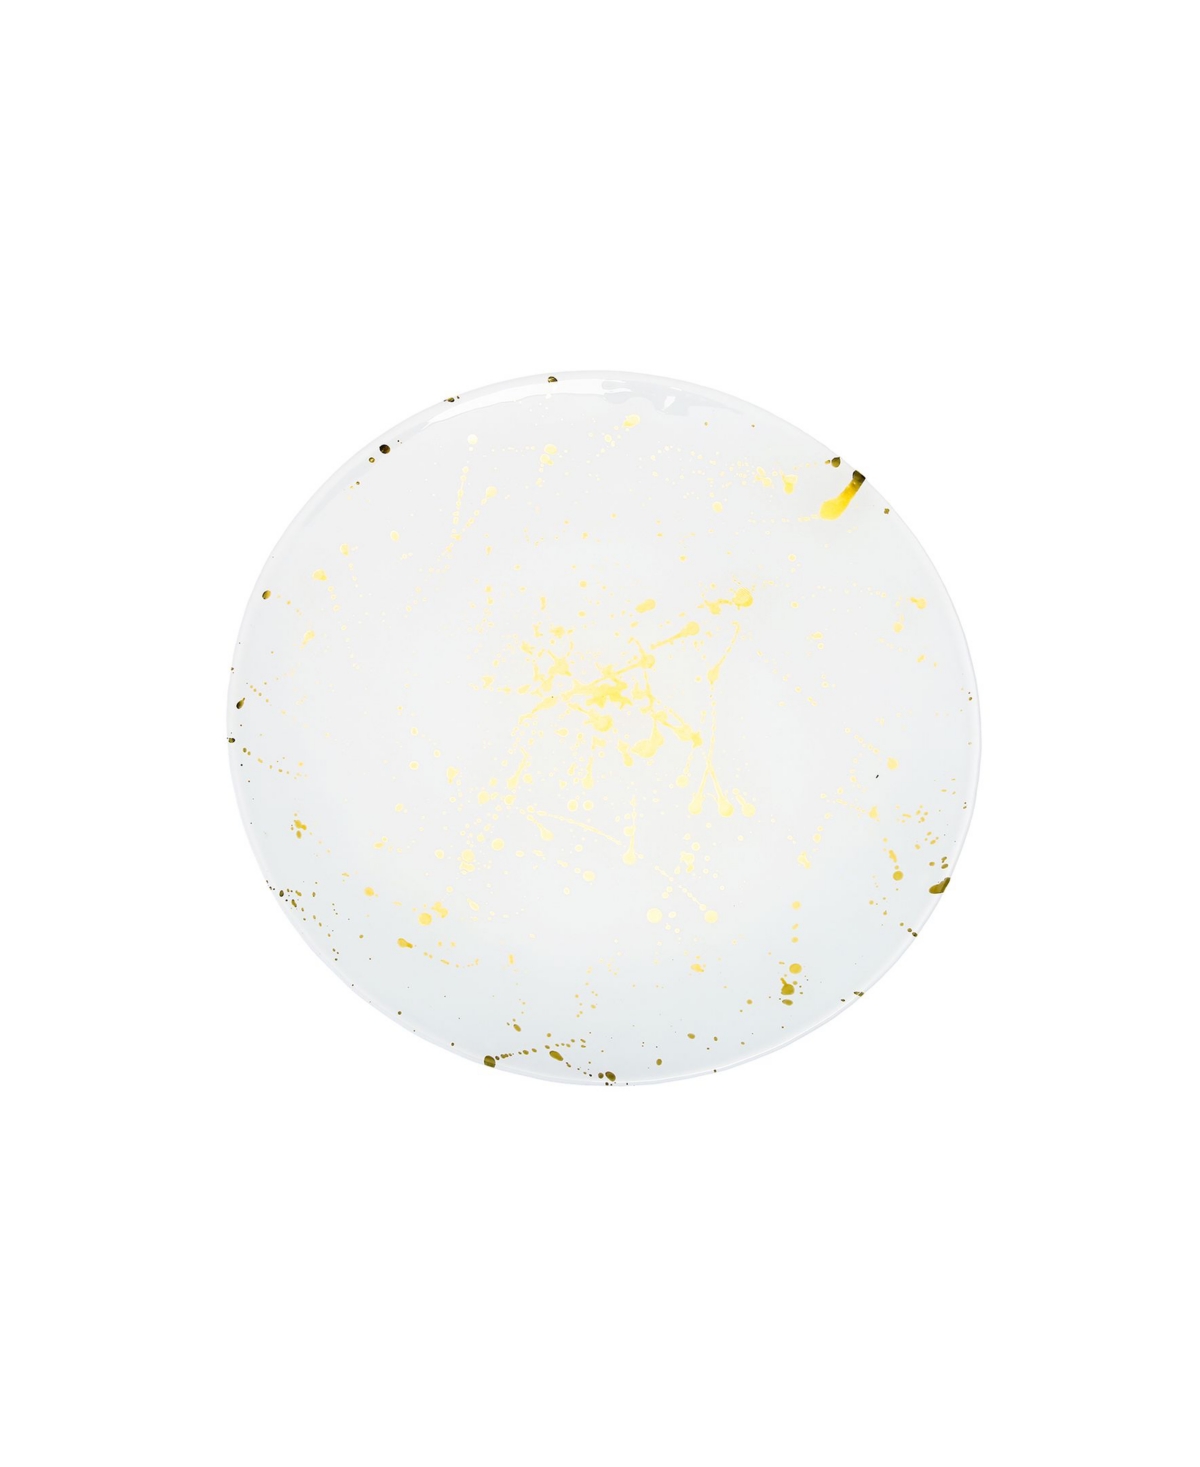 Charger Plate with Splashy Gold Tone Design - Natural